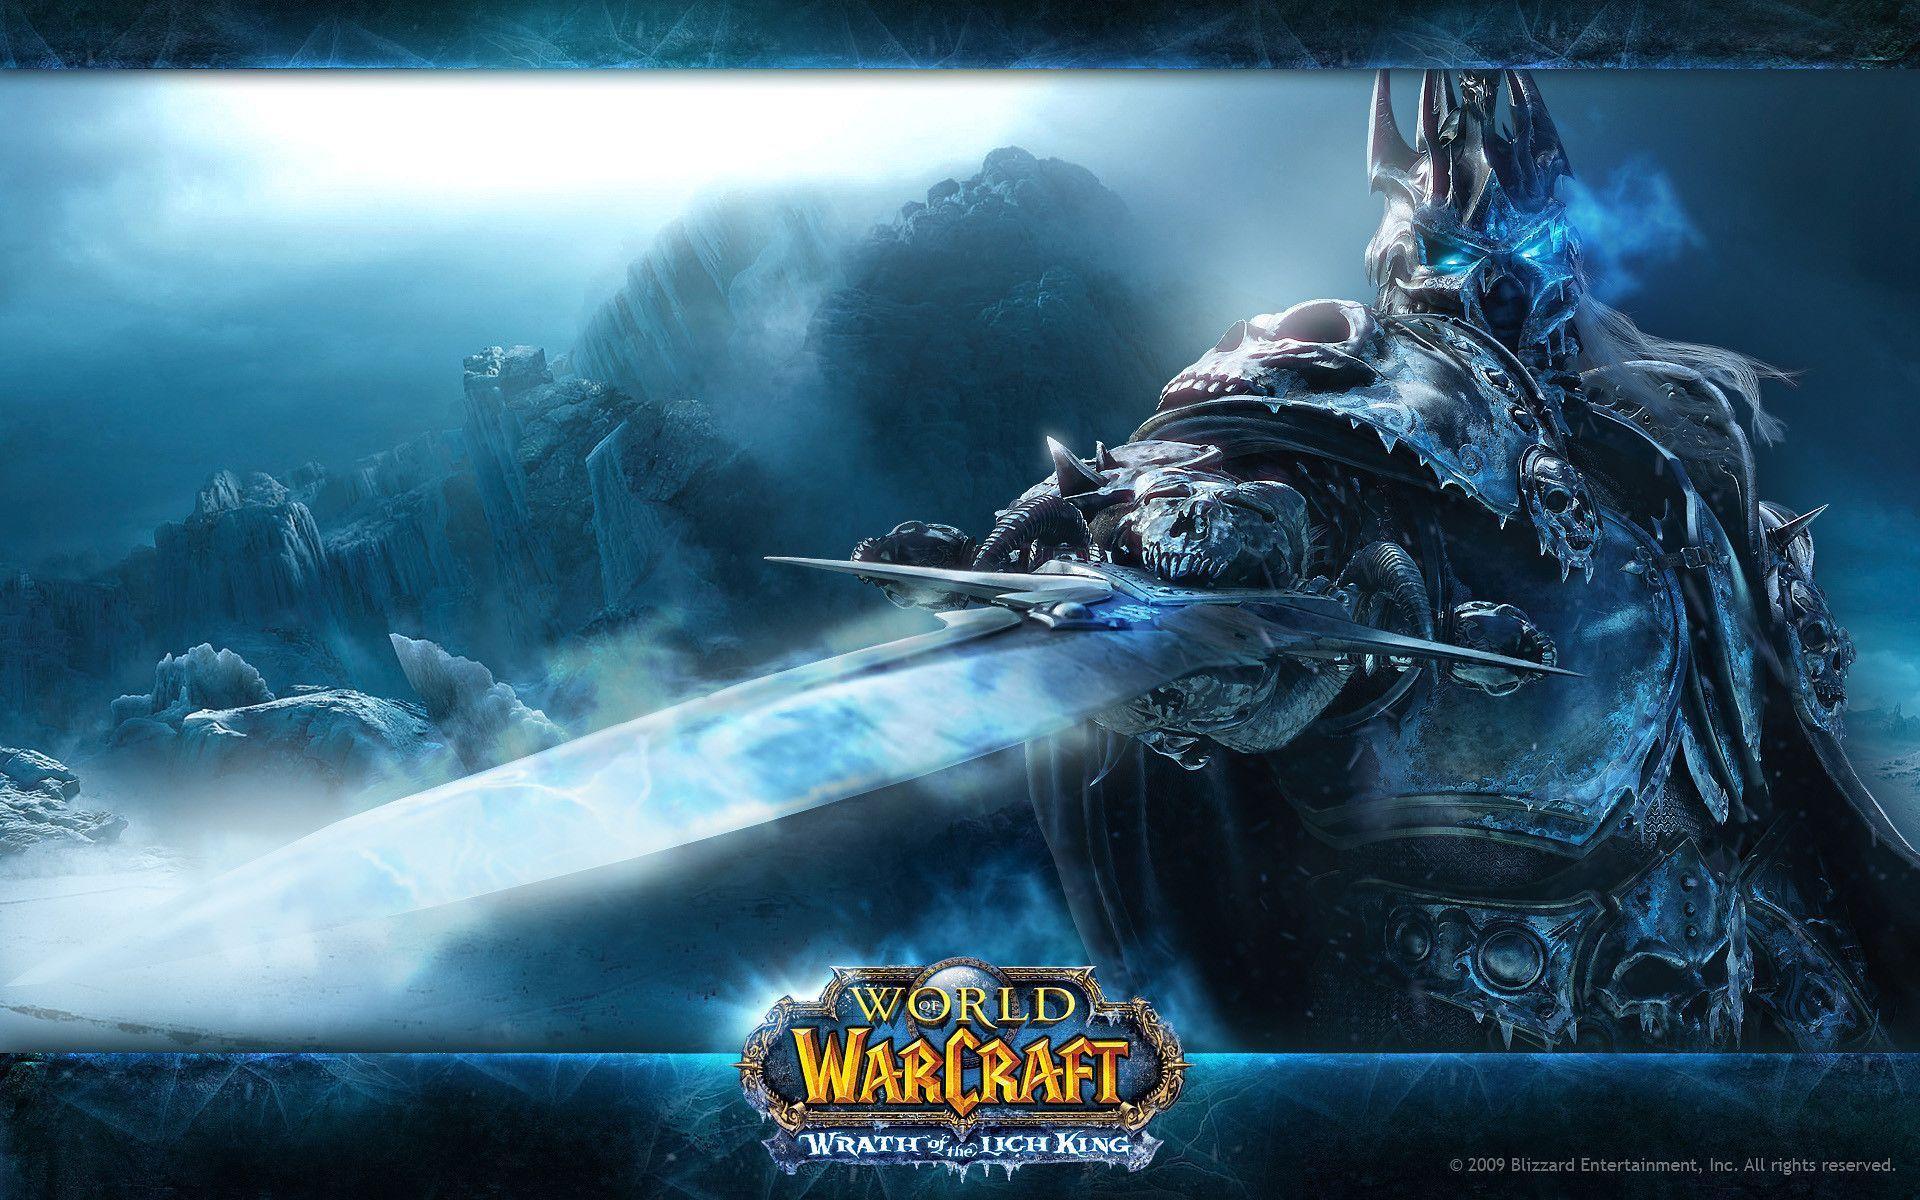 Blizzard Entertainment: World of Warcraft: Wrath of the Lich King